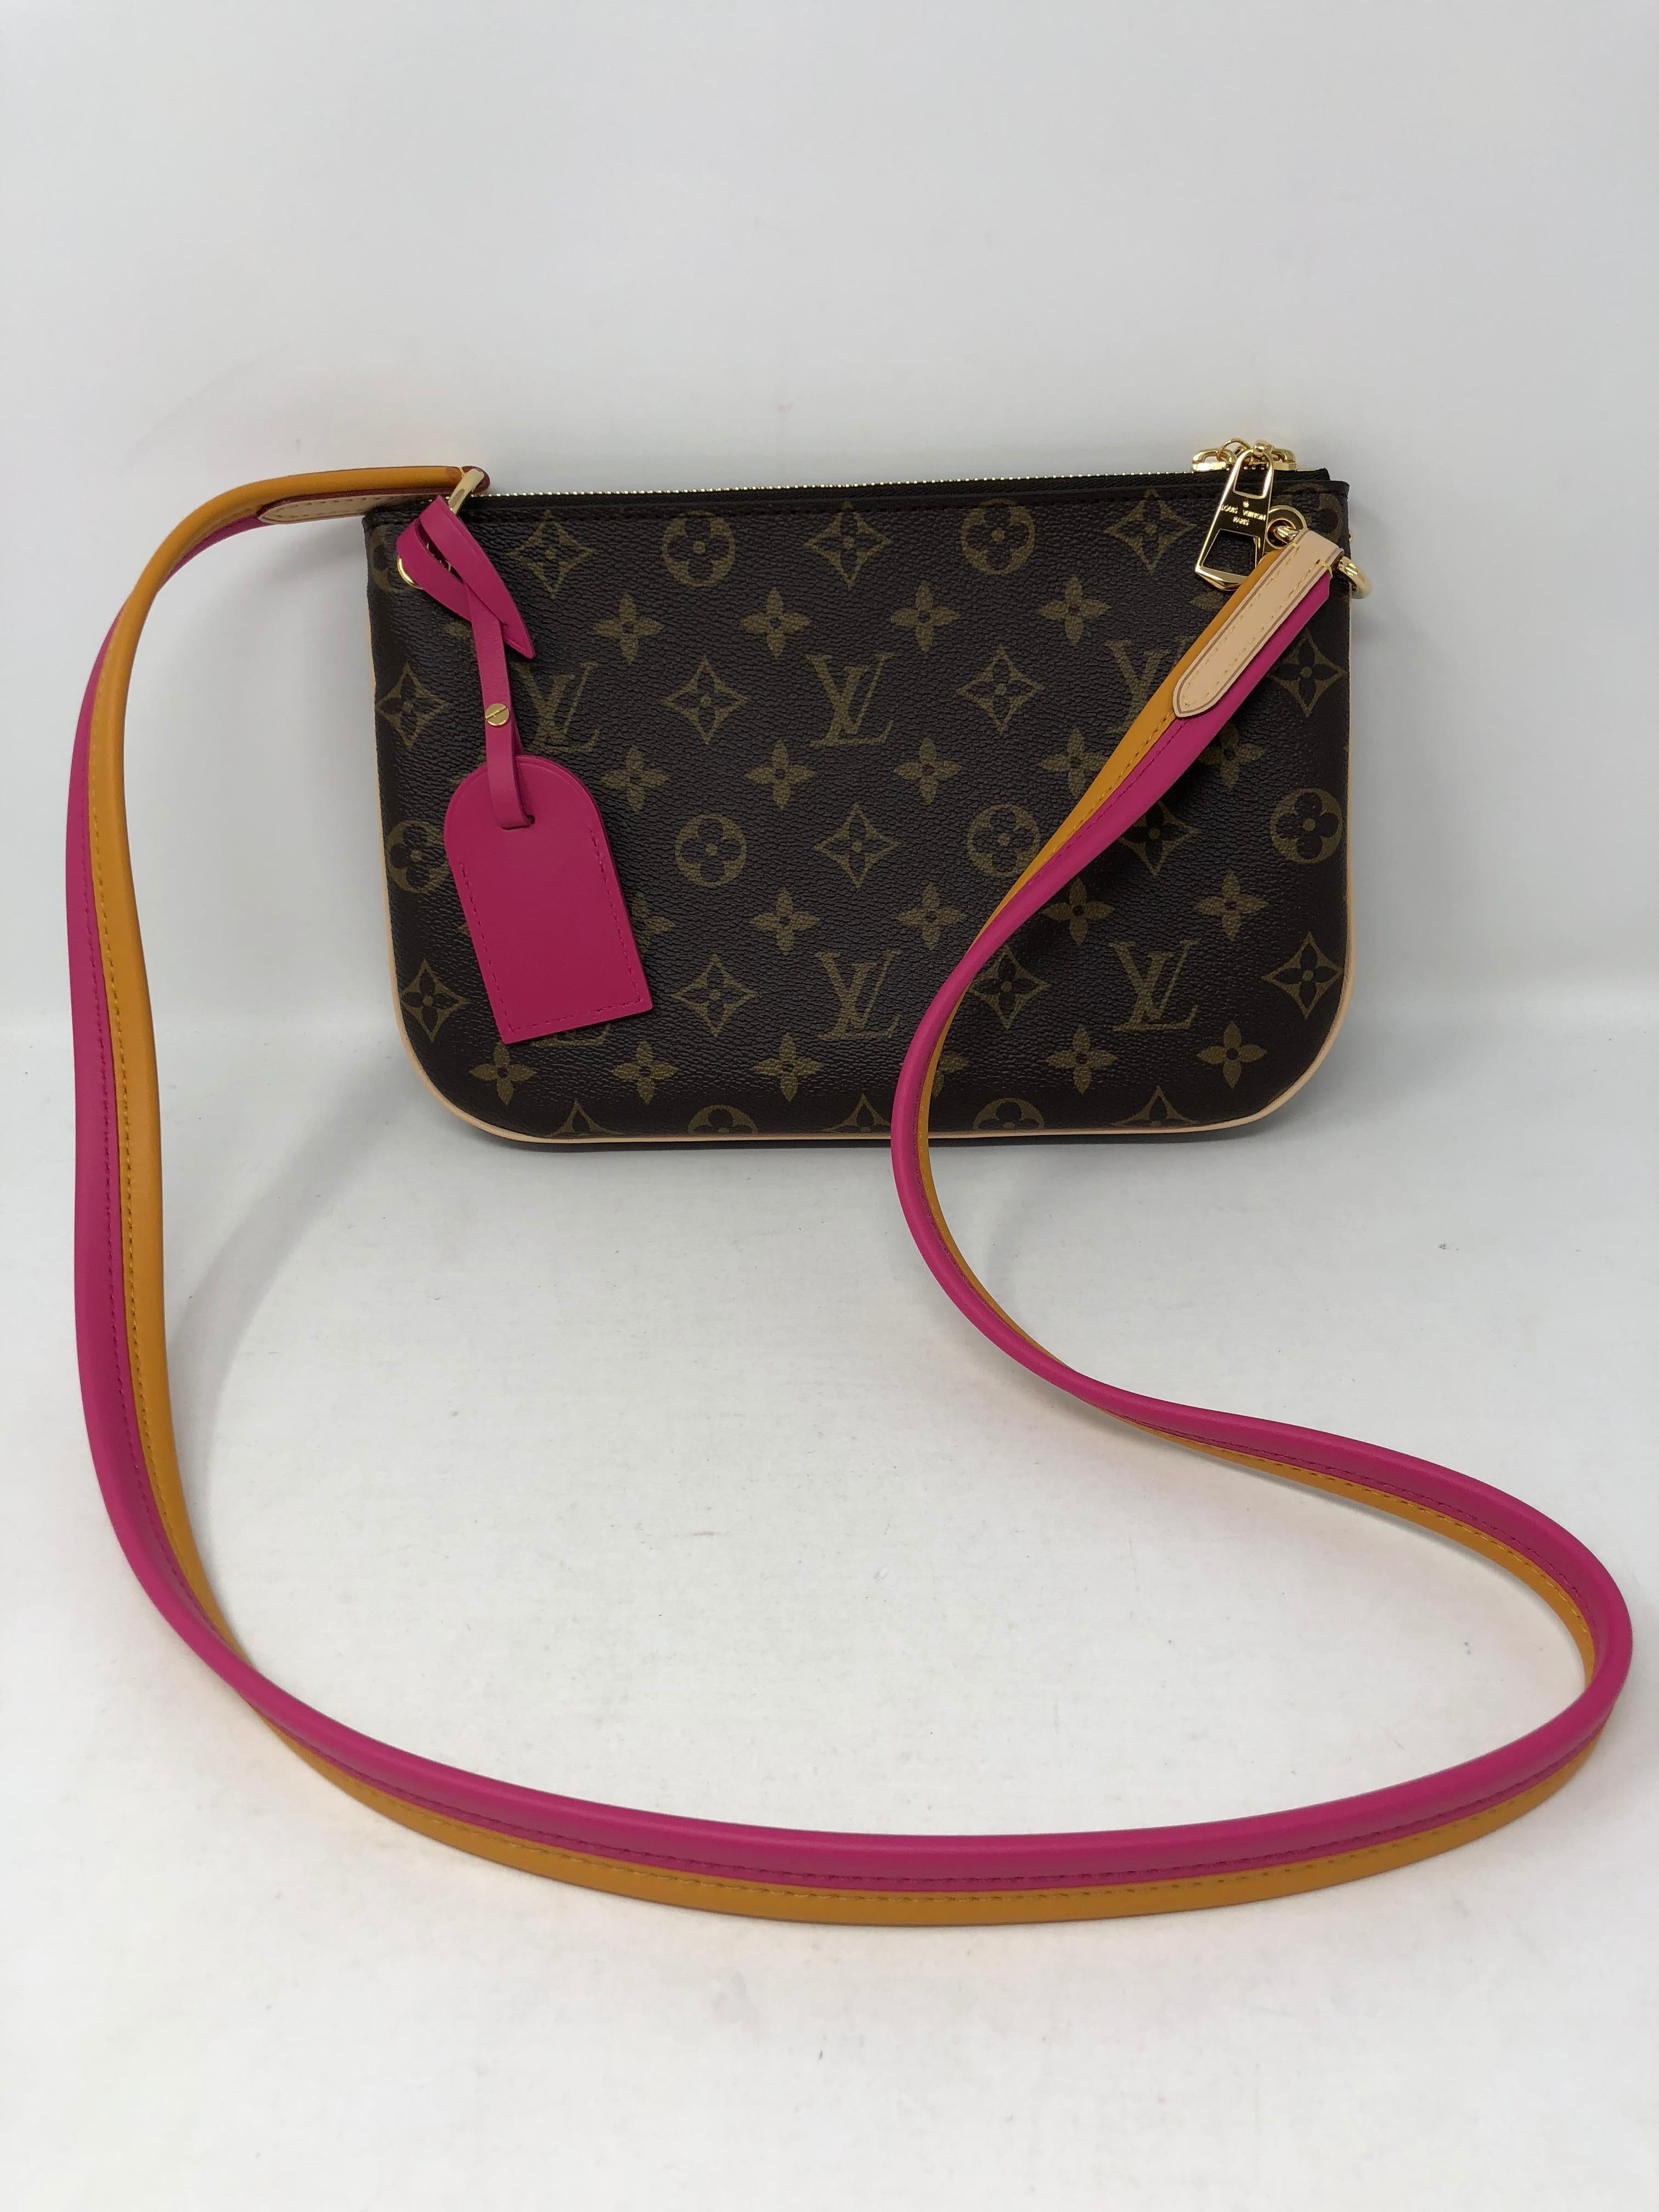 Louis Vuitton with pink and orange leather strap crossbody bag. Brand new and never used. Guaranteed authentic. 